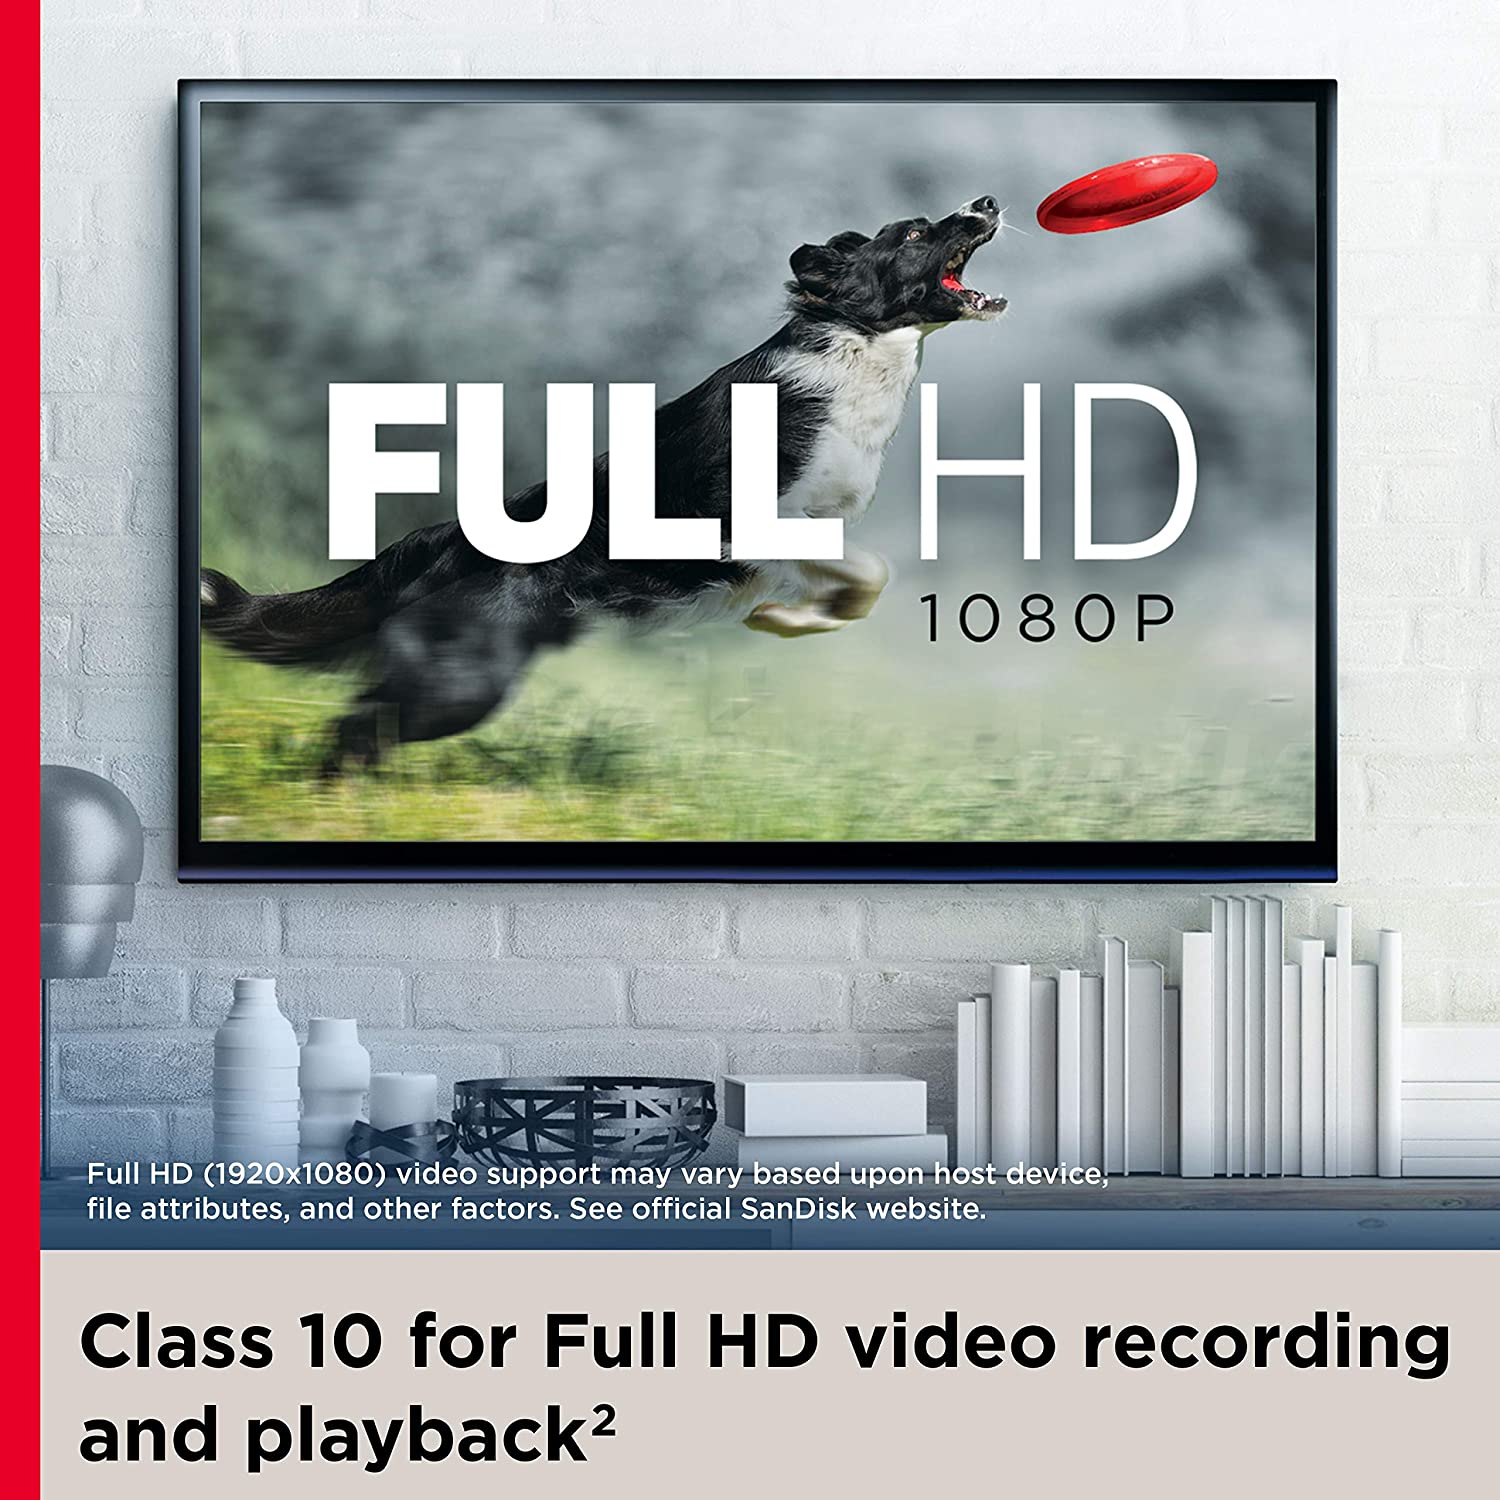 Class 10 for full hD video recording and playback 1080p